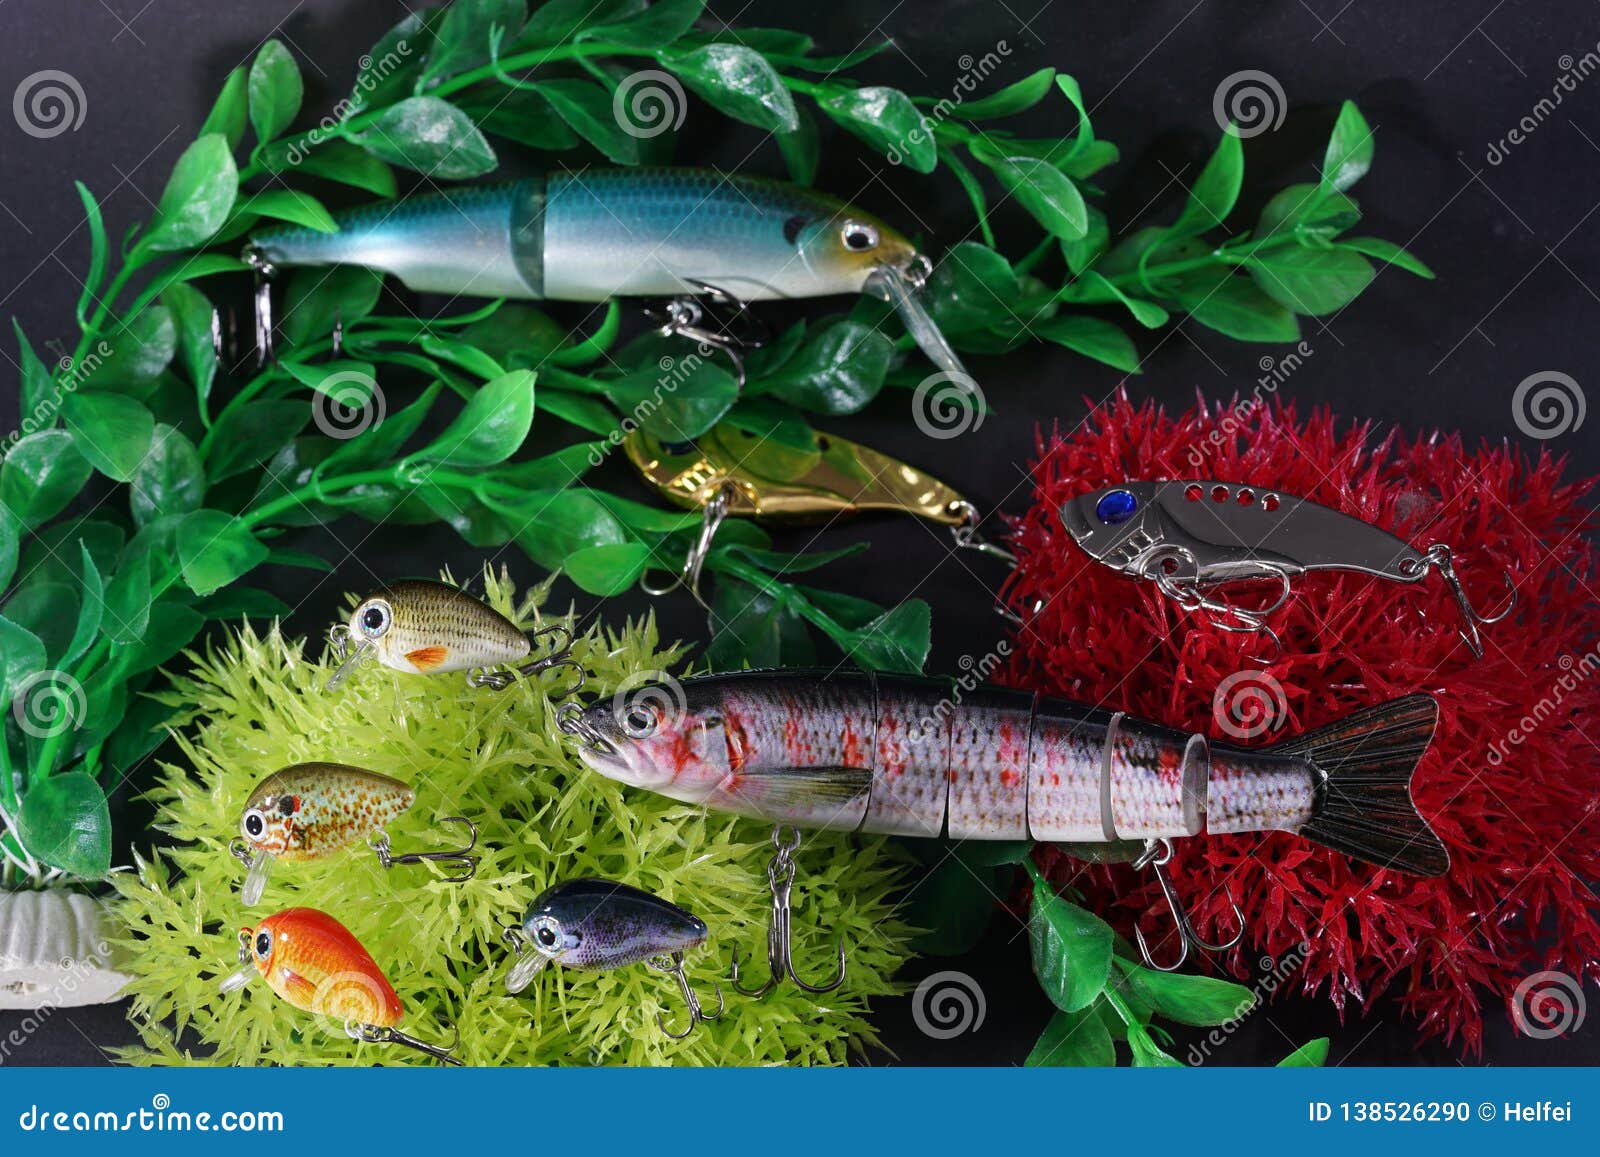 Artificial Aquarium with Artificial Fish that are Good for Fishing for  Predator Fish Stock Photo - Image of goldfish, yellow: 138526290